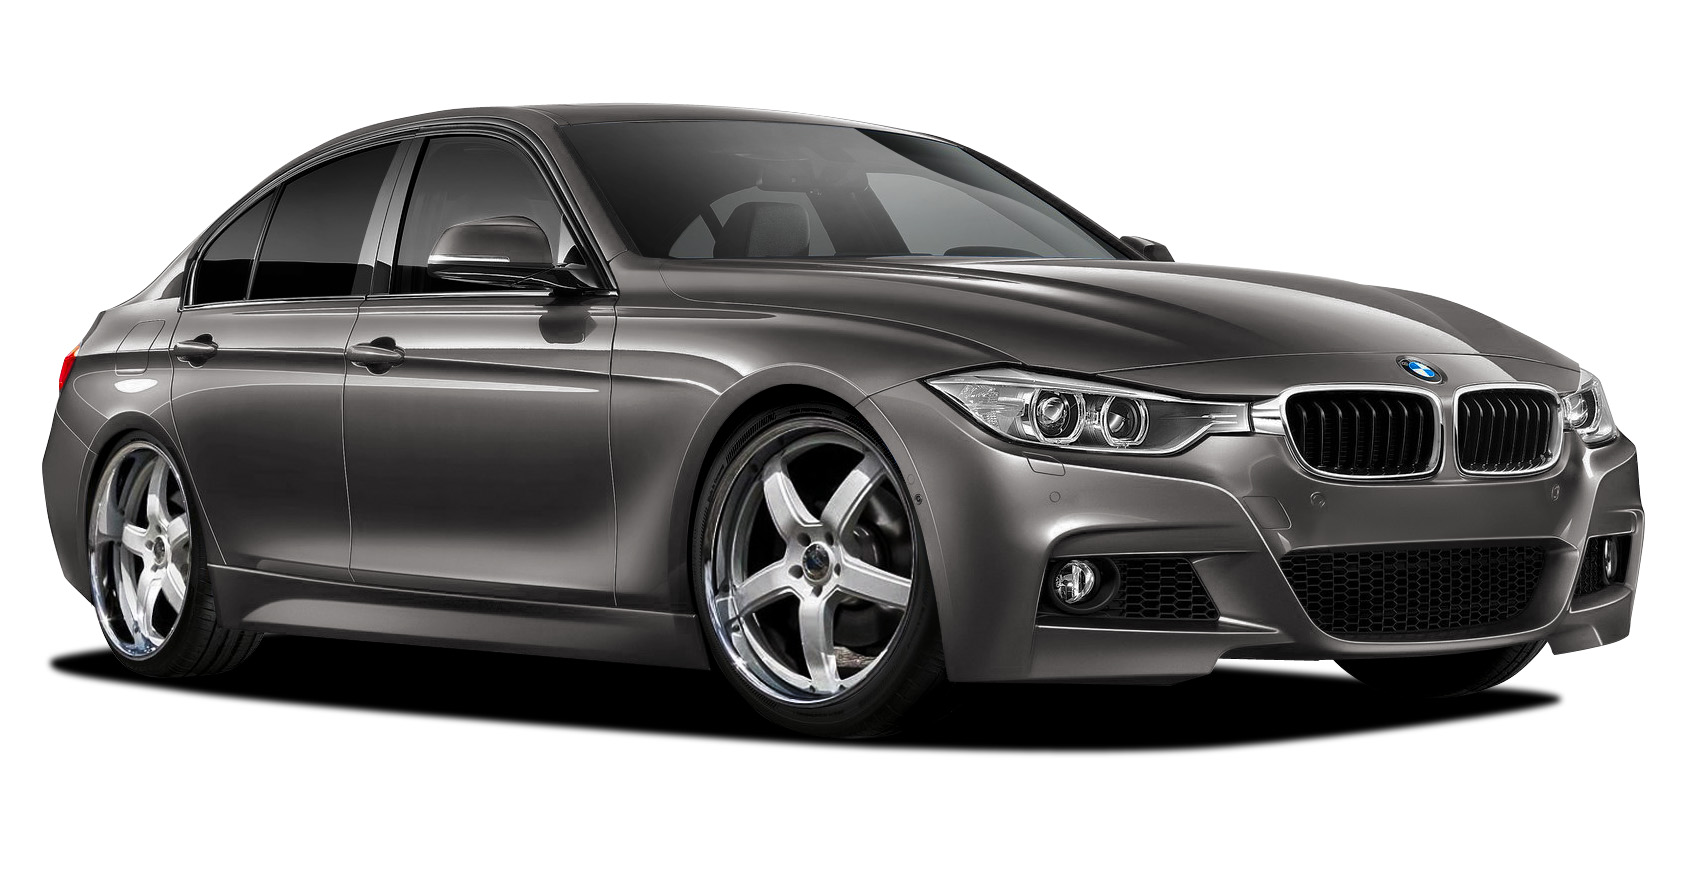 Polypropylene Body Kit Bodykit for 2012 BMW 3 Series ALL - BMW 3 Series 335i F30 Vaero M Sport Look Kit ( with PDC , with Park Aid , with Washer , wit